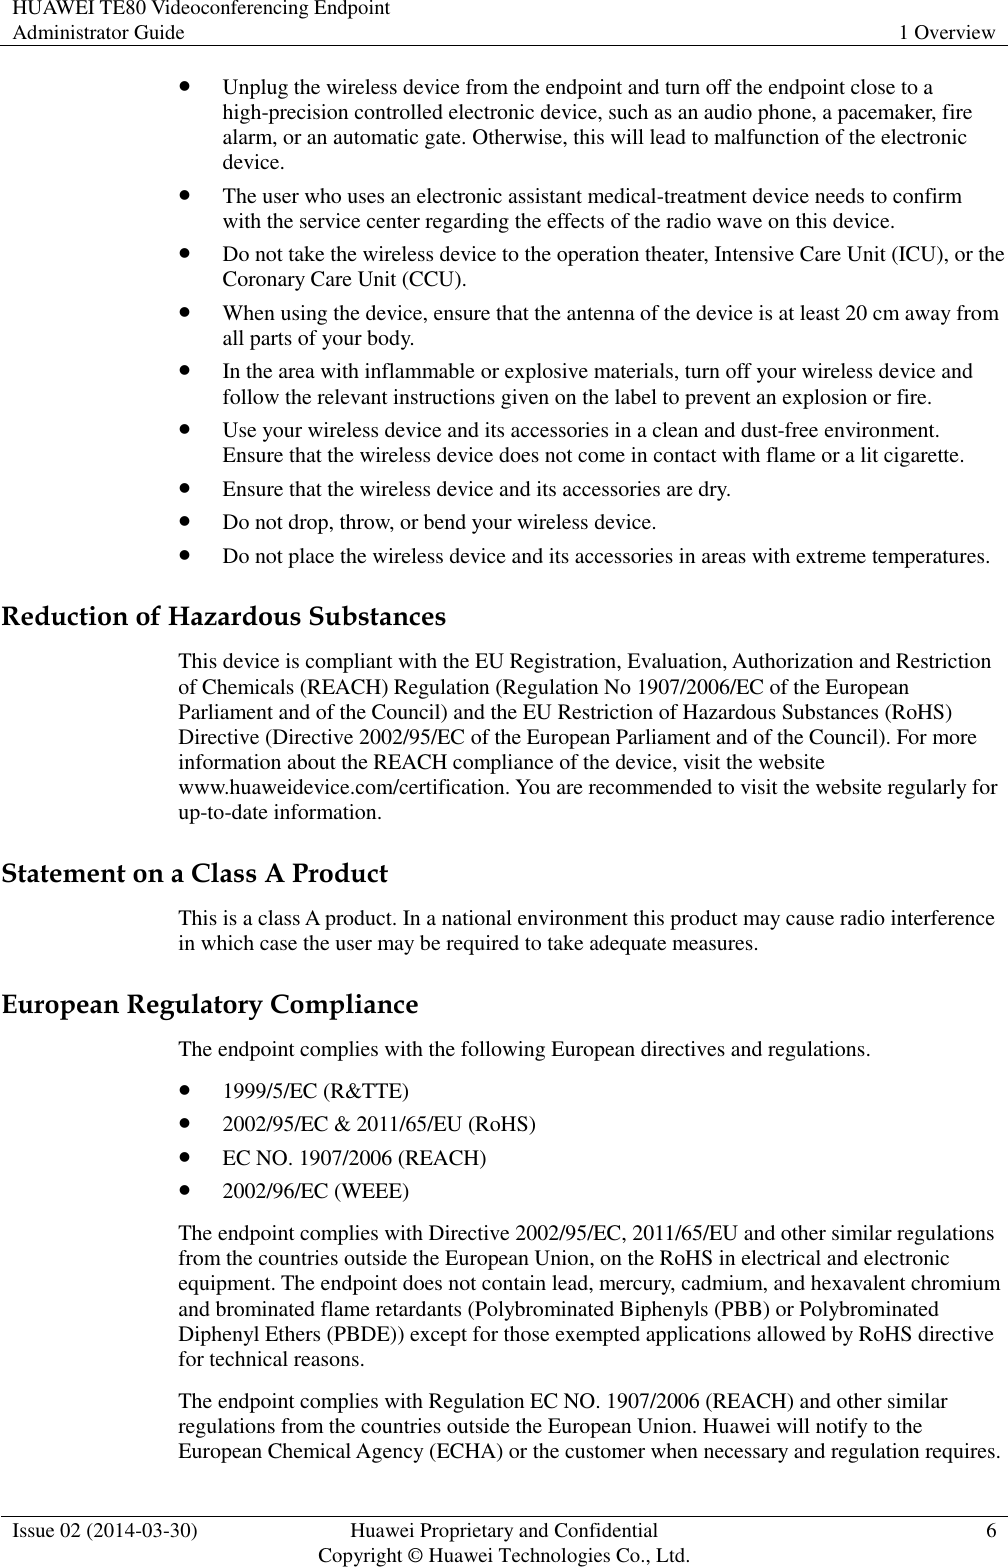 HUAWEI TE80 Videoconferencing Endpoint Administrator Guide 1 Overview  Issue 02 (2014-03-30) Huawei Proprietary and Confidential Copyright © Huawei Technologies Co., Ltd. 6   Unplug the wireless device from the endpoint and turn off the endpoint close to a high-precision controlled electronic device, such as an audio phone, a pacemaker, fire alarm, or an automatic gate. Otherwise, this will lead to malfunction of the electronic device.  The user who uses an electronic assistant medical-treatment device needs to confirm with the service center regarding the effects of the radio wave on this device.  Do not take the wireless device to the operation theater, Intensive Care Unit (ICU), or the Coronary Care Unit (CCU).  When using the device, ensure that the antenna of the device is at least 20 cm away from all parts of your body.  In the area with inflammable or explosive materials, turn off your wireless device and follow the relevant instructions given on the label to prevent an explosion or fire.  Use your wireless device and its accessories in a clean and dust-free environment. Ensure that the wireless device does not come in contact with flame or a lit cigarette.  Ensure that the wireless device and its accessories are dry.  Do not drop, throw, or bend your wireless device.  Do not place the wireless device and its accessories in areas with extreme temperatures. Reduction of Hazardous Substances This device is compliant with the EU Registration, Evaluation, Authorization and Restriction of Chemicals (REACH) Regulation (Regulation No 1907/2006/EC of the European Parliament and of the Council) and the EU Restriction of Hazardous Substances (RoHS) Directive (Directive 2002/95/EC of the European Parliament and of the Council). For more information about the REACH compliance of the device, visit the website www.huaweidevice.com/certification. You are recommended to visit the website regularly for up-to-date information. Statement on a Class A Product This is a class A product. In a national environment this product may cause radio interference in which case the user may be required to take adequate measures.   European Regulatory Compliance The endpoint complies with the following European directives and regulations.  1999/5/EC (R&amp;TTE)  2002/95/EC &amp; 2011/65/EU (RoHS)  EC NO. 1907/2006 (REACH)  2002/96/EC (WEEE) The endpoint complies with Directive 2002/95/EC, 2011/65/EU and other similar regulations from the countries outside the European Union, on the RoHS in electrical and electronic equipment. The endpoint does not contain lead, mercury, cadmium, and hexavalent chromium and brominated flame retardants (Polybrominated Biphenyls (PBB) or Polybrominated Diphenyl Ethers (PBDE)) except for those exempted applications allowed by RoHS directive for technical reasons. The endpoint complies with Regulation EC NO. 1907/2006 (REACH) and other similar regulations from the countries outside the European Union. Huawei will notify to the European Chemical Agency (ECHA) or the customer when necessary and regulation requires. 